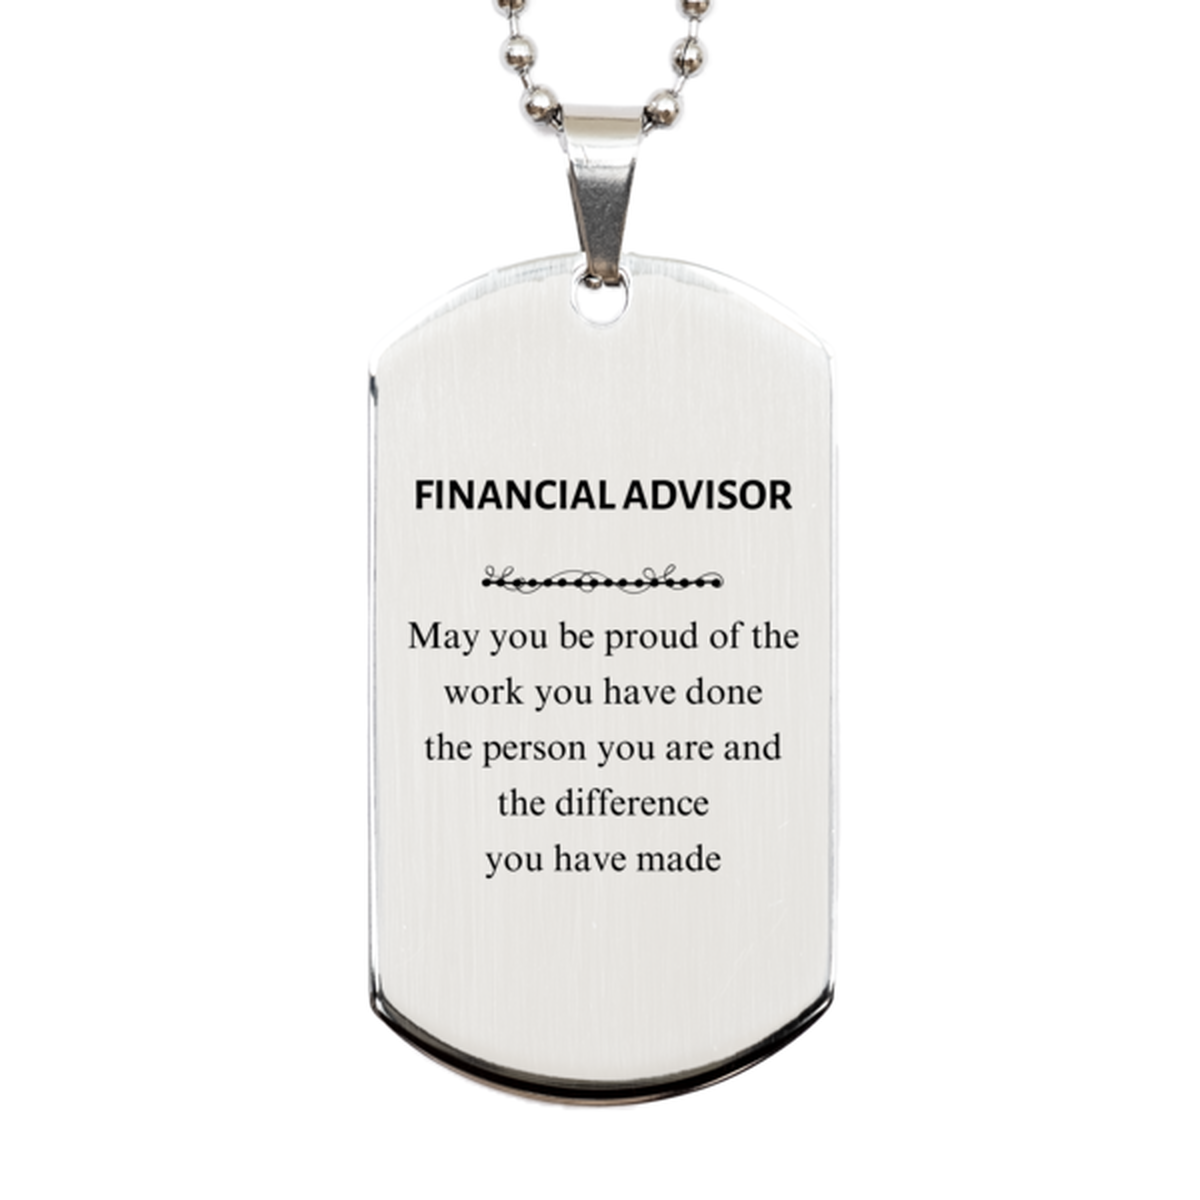 Financial Advisor May you be proud of the work you have done, Retirement Financial Advisor Silver Dog Tag for Colleague Appreciation Gifts Amazing for Financial Advisor